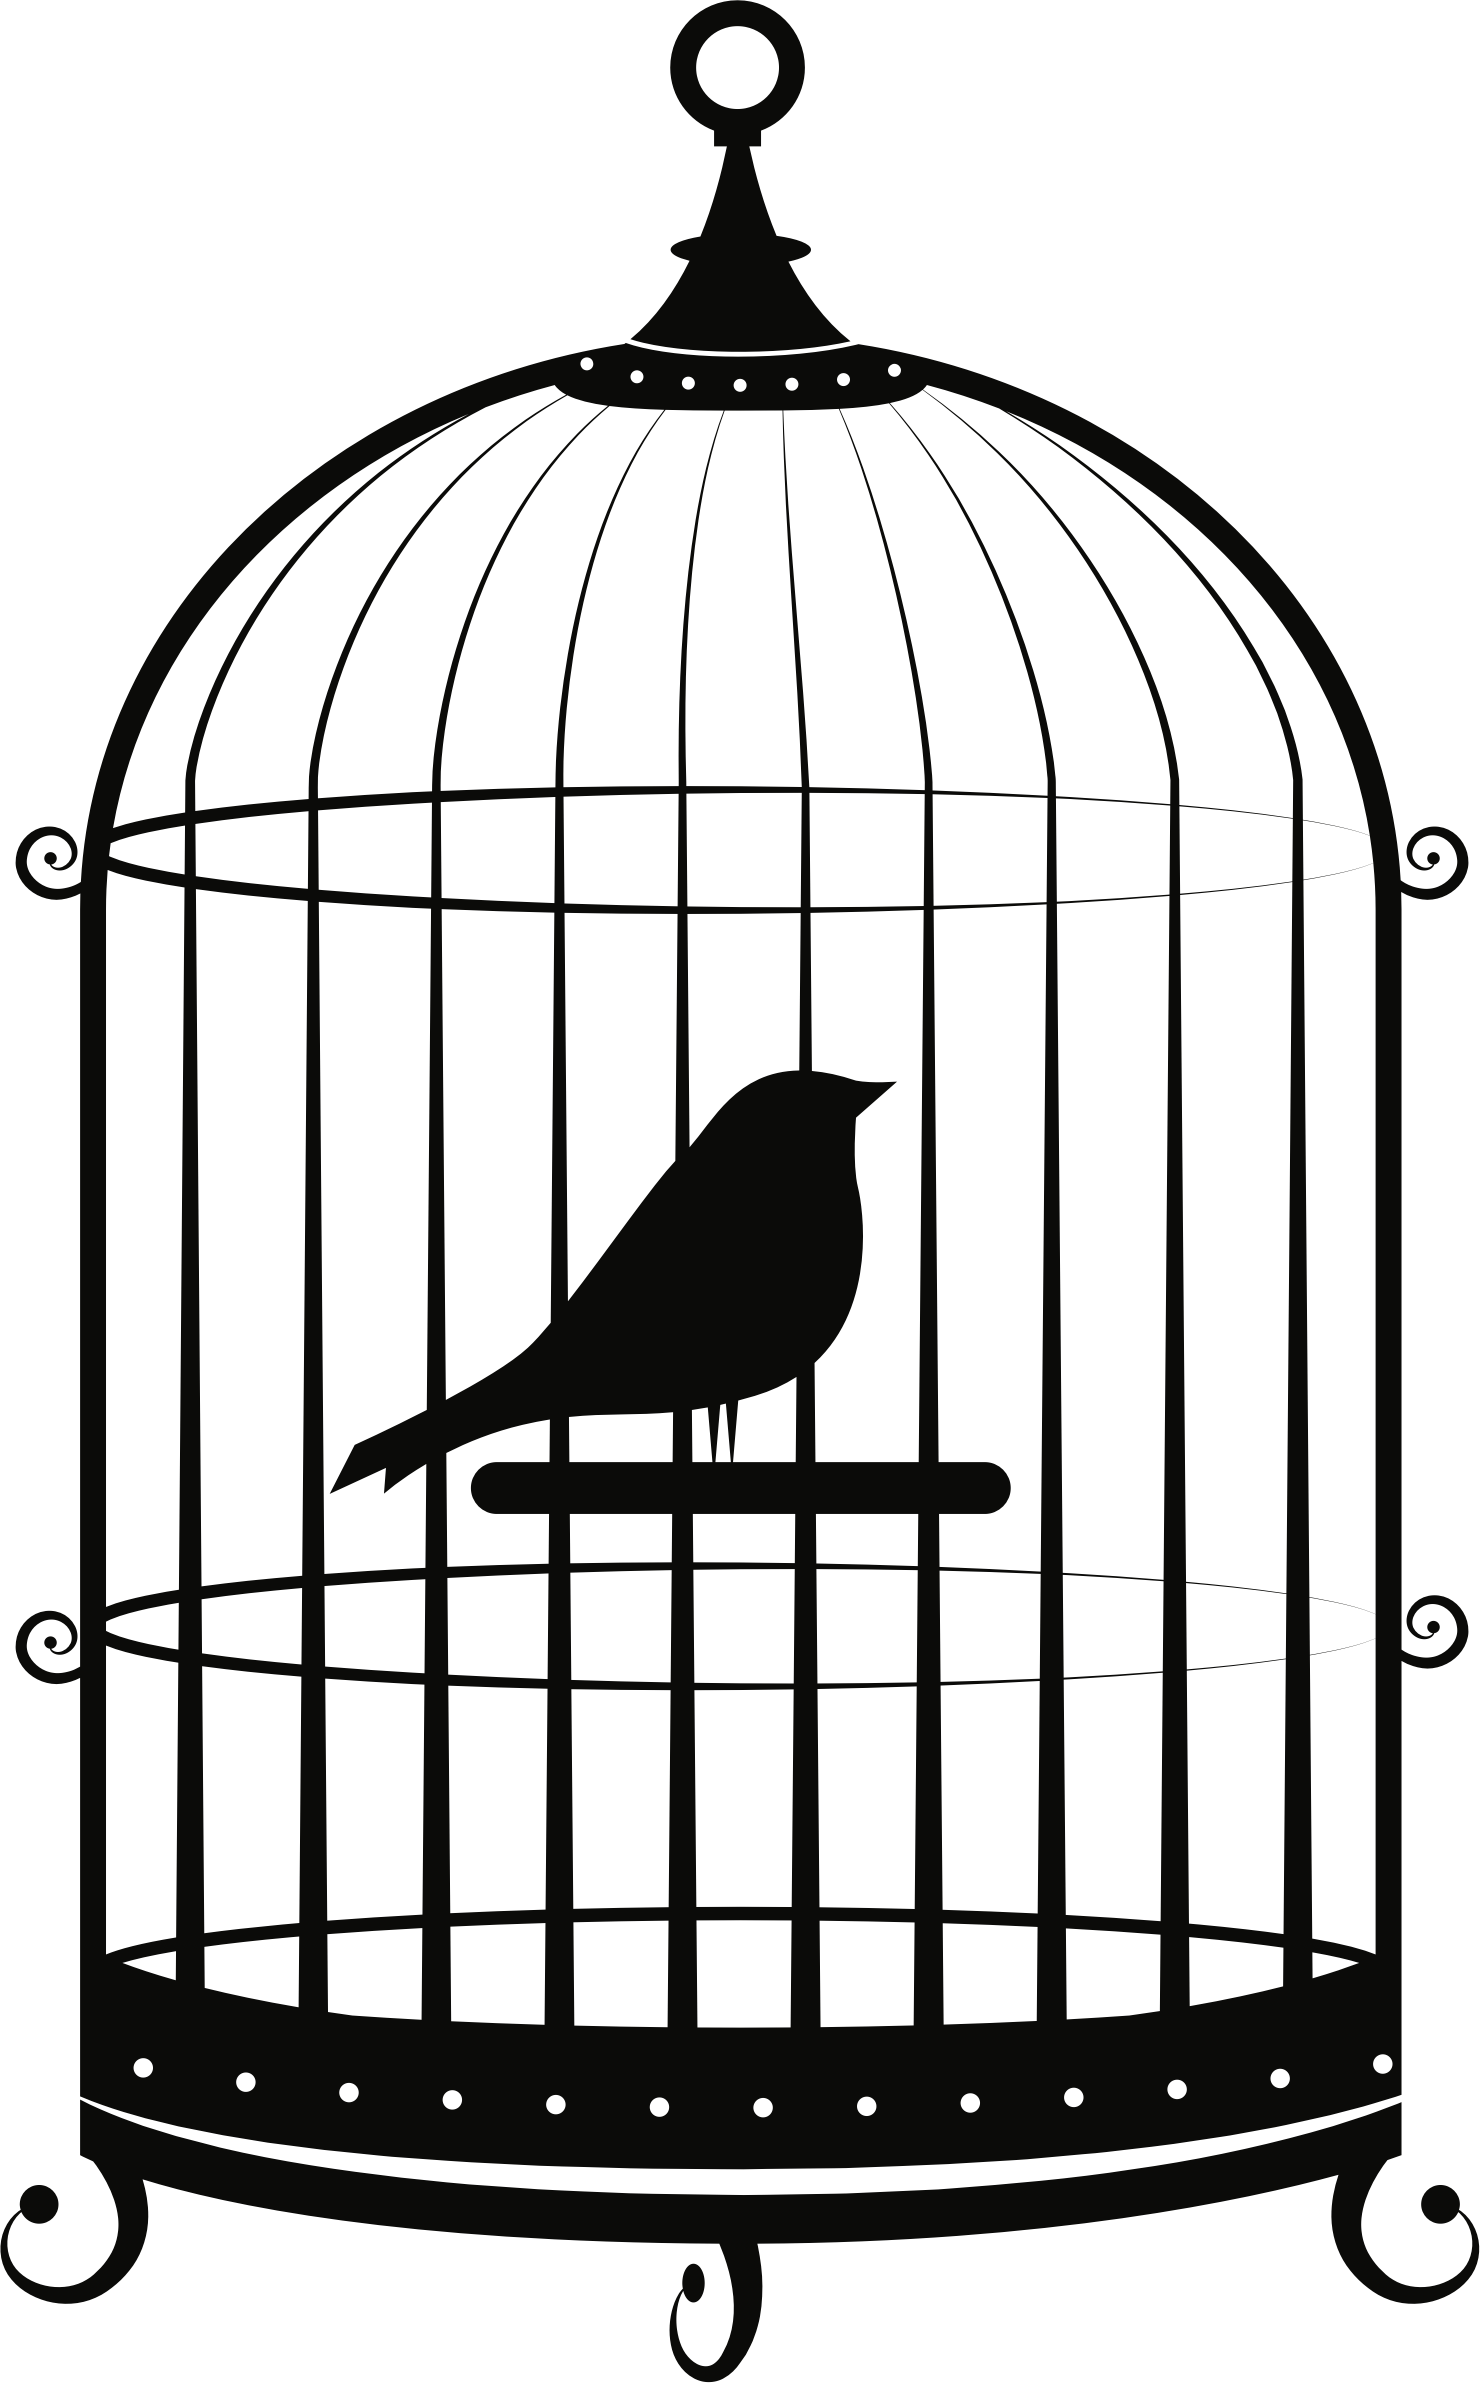 Cage Image PNG Image High Quality PNG Image